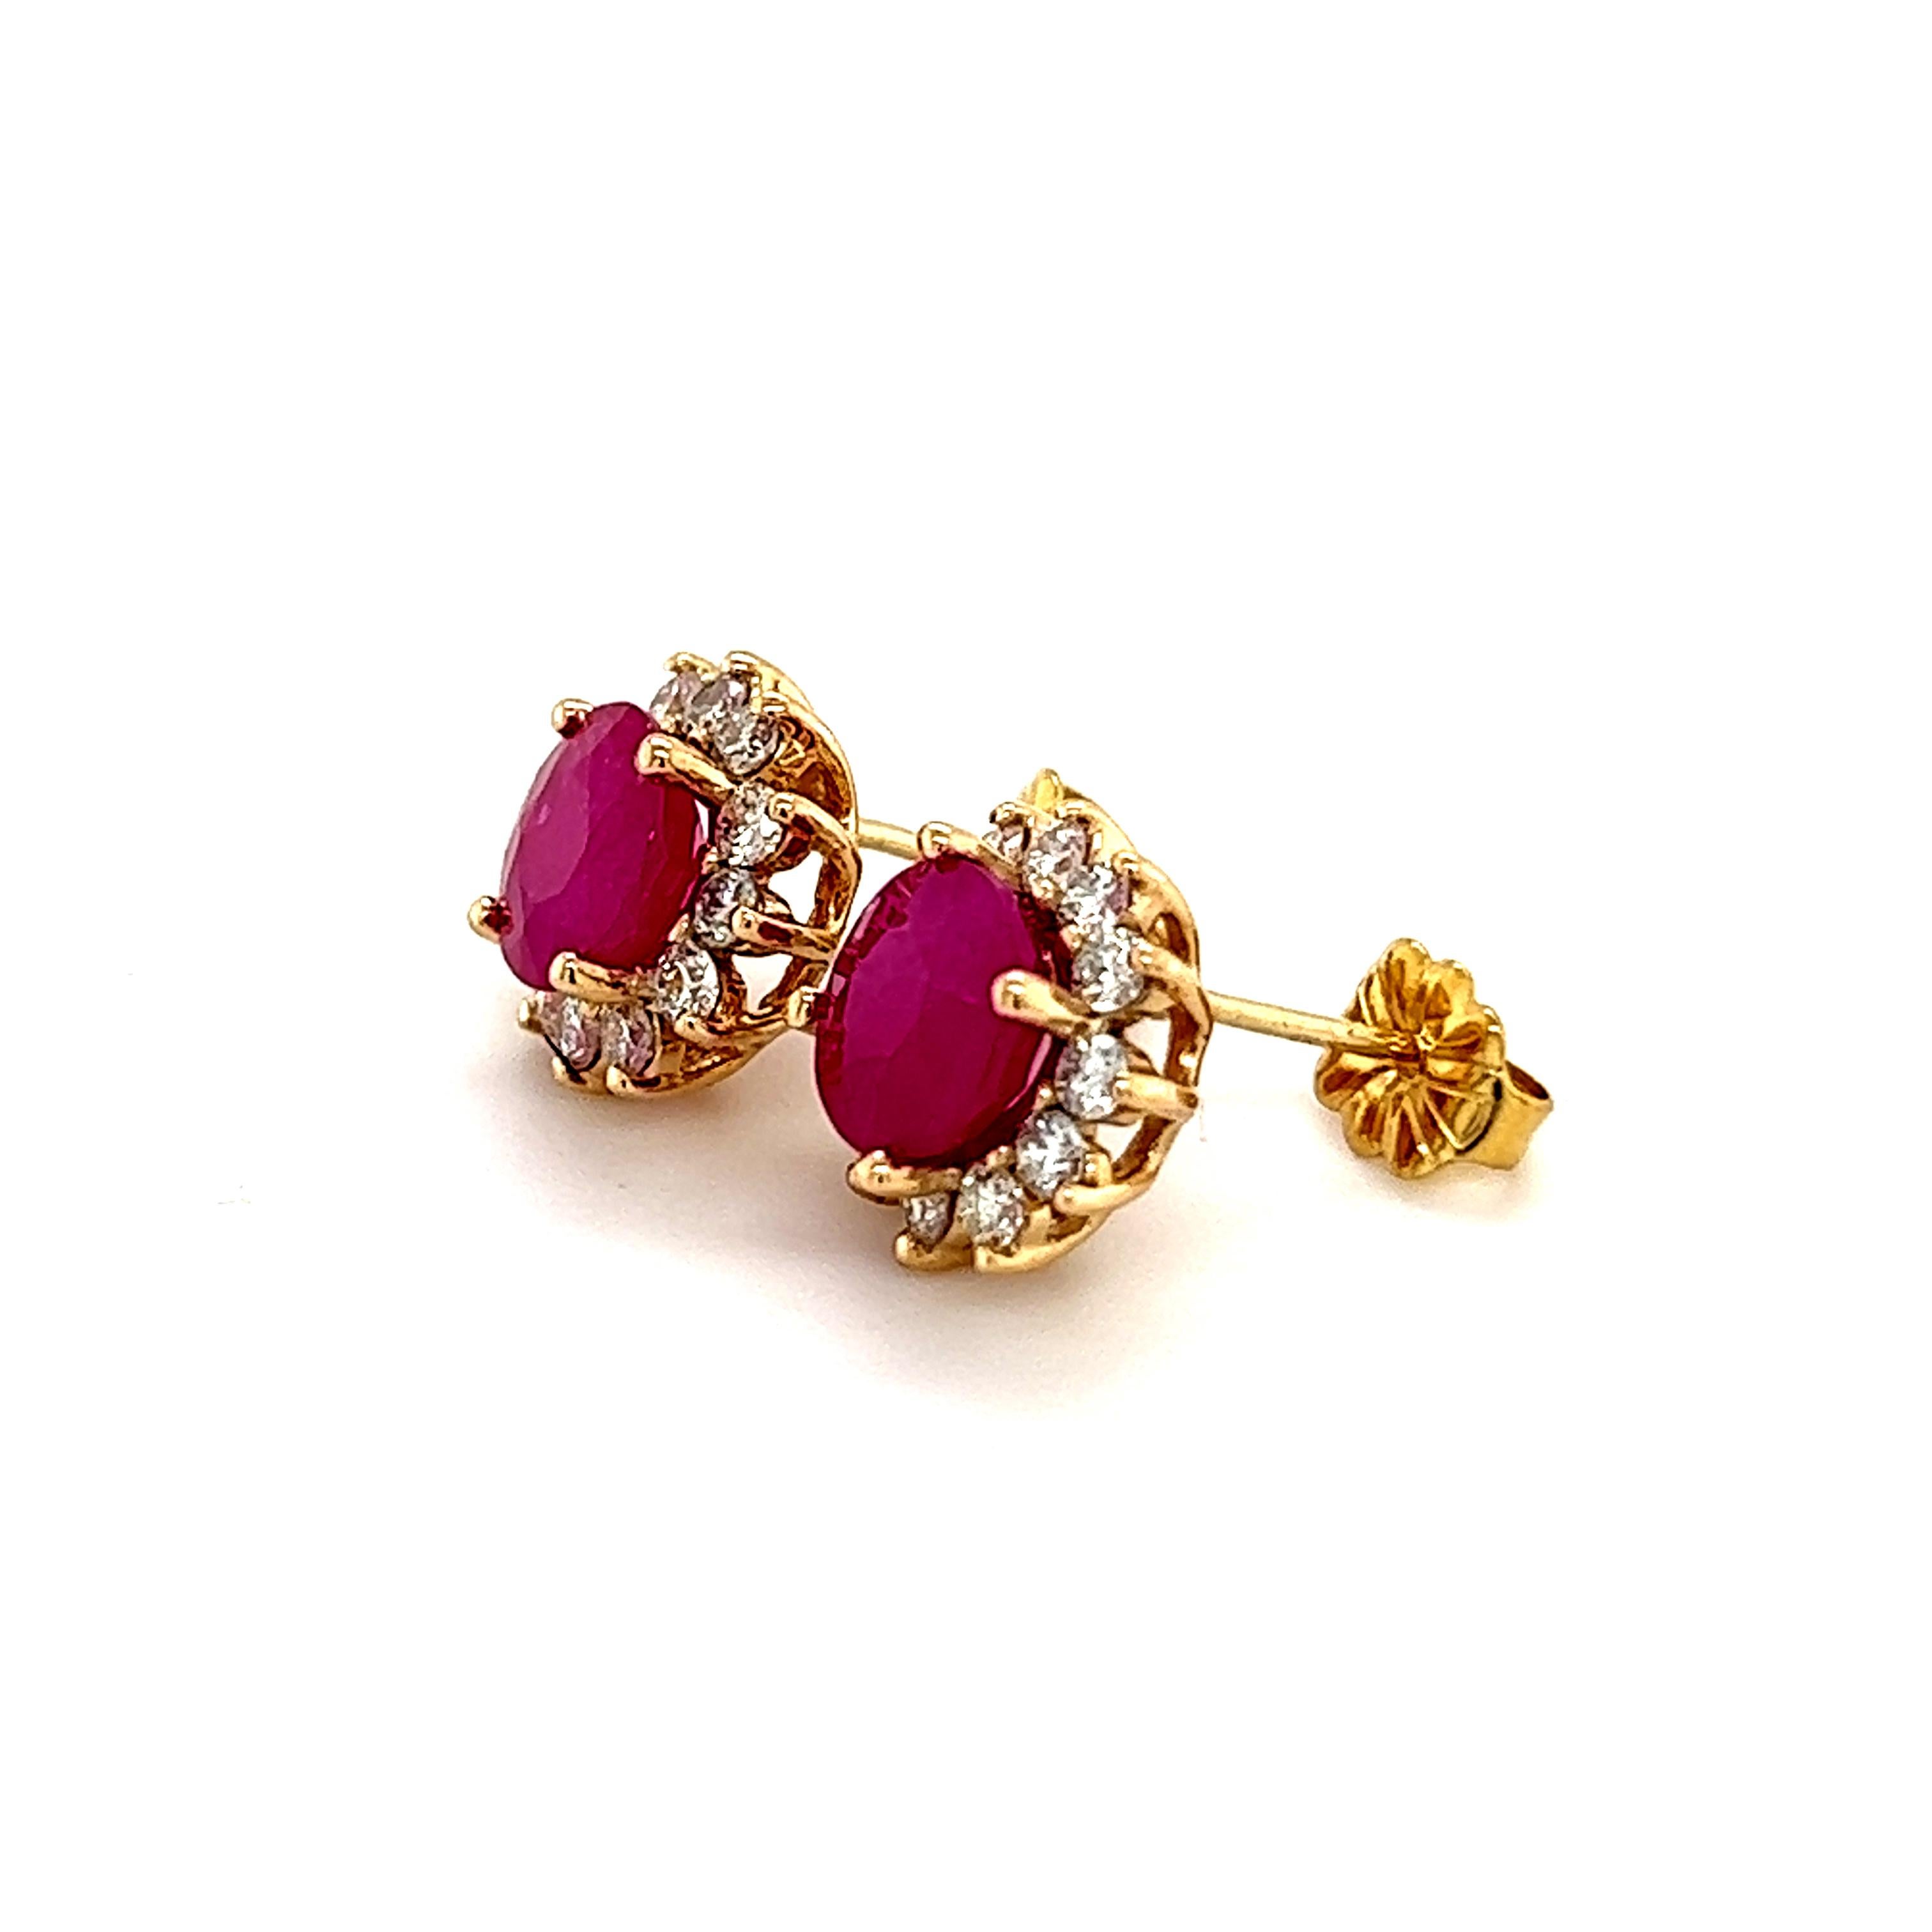 Natural Ruby Diamond Earrings 14k Gold 3.72 TCW Certified $5,950 211346

Nothing says, “I Love you” more than Diamonds and Pearls!

These Ruby earrings have been Certified, Inspected, and Appraised by Gemological Appraisal Laboratory

Gemological